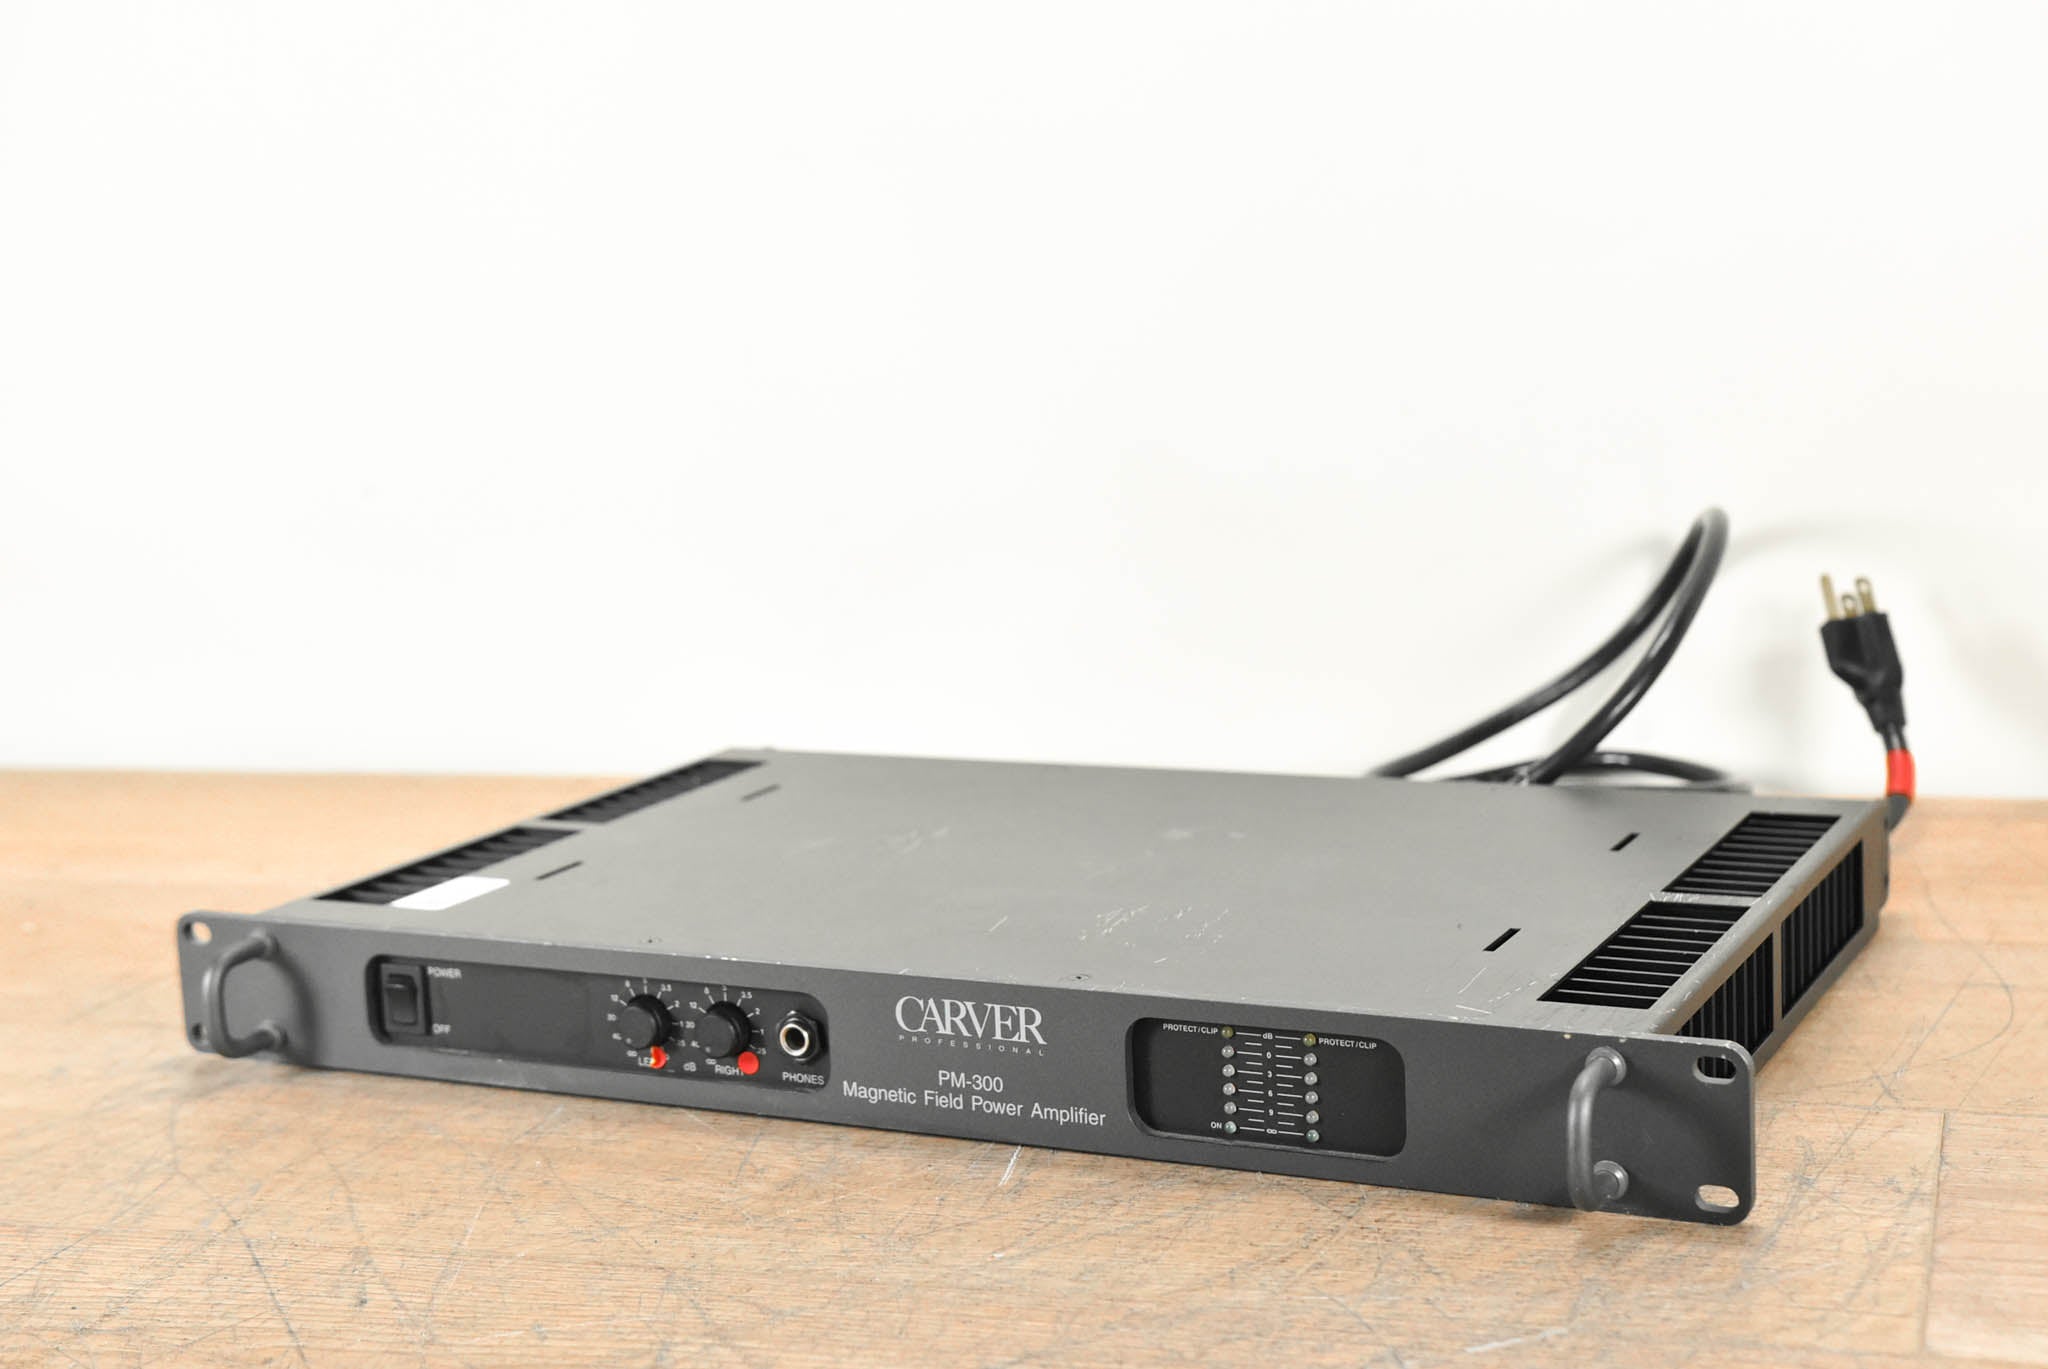 Carver PM-300 2-Channel Magnetic Field Power Amplifier